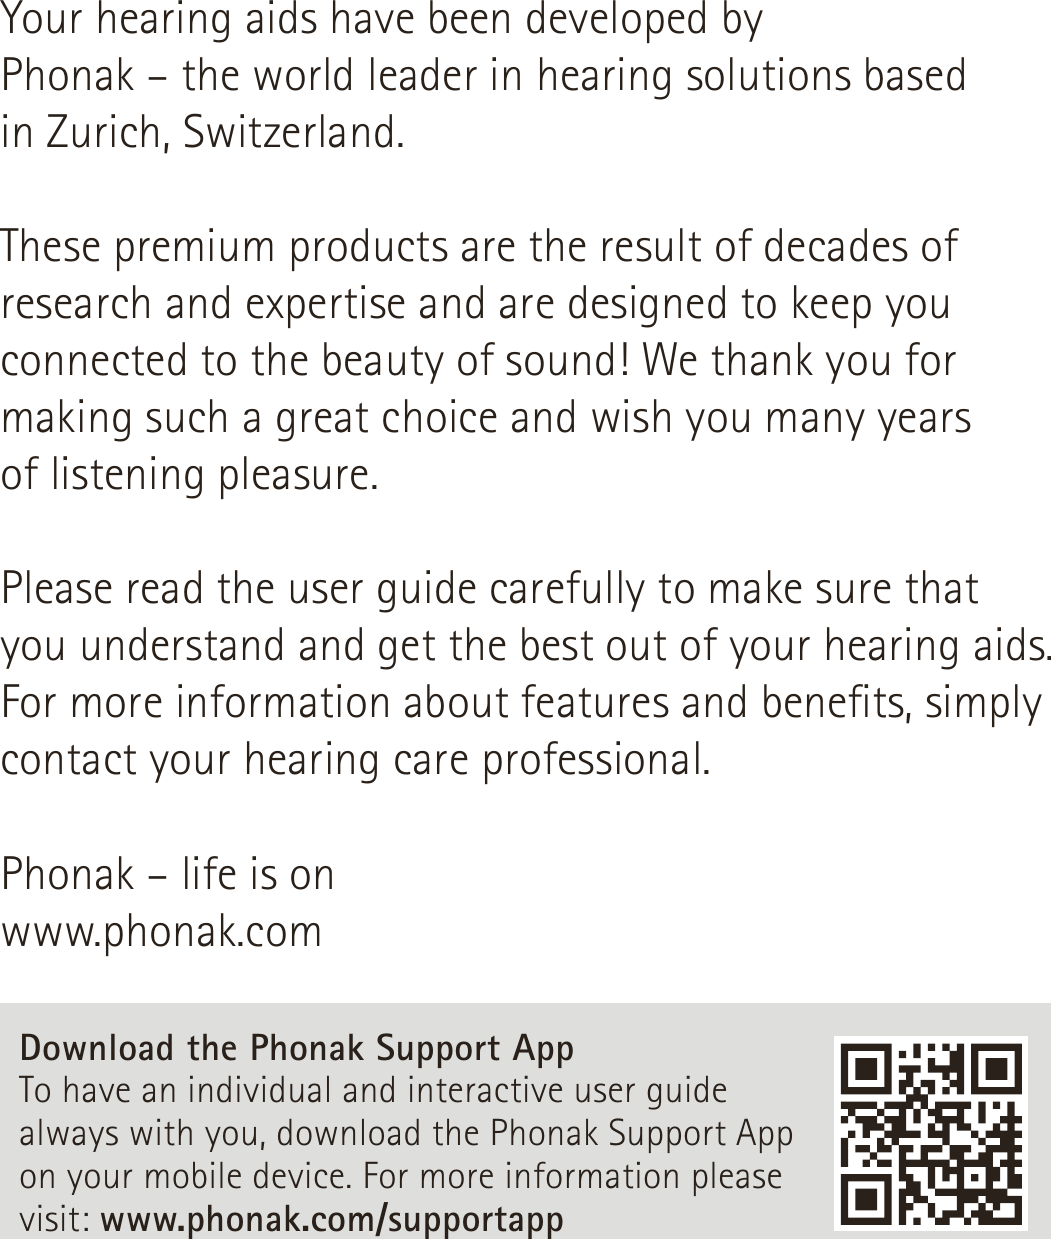 Your hearing aids have been developed by  Phonak – the world leader in hearing solutions based  in Zurich, Switzerland.These premium products are the result of decades of research and expertise and are designed to keep you connected to the beauty of sound! We thank you for making such a great choice and wish you many years  of listening pleasure.Please read the user guide carefully to make sure that  you understand and get the best out of your hearing aids. For more information about features and benets, simply contact your hearing care professional.Phonak – life is onwww.phonak.comDownload the Phonak Support App To have an individual and interactive user guide always with you, download the Phonak Support App on your mobile device. For more information please visit: www.phonak.com/supportapp